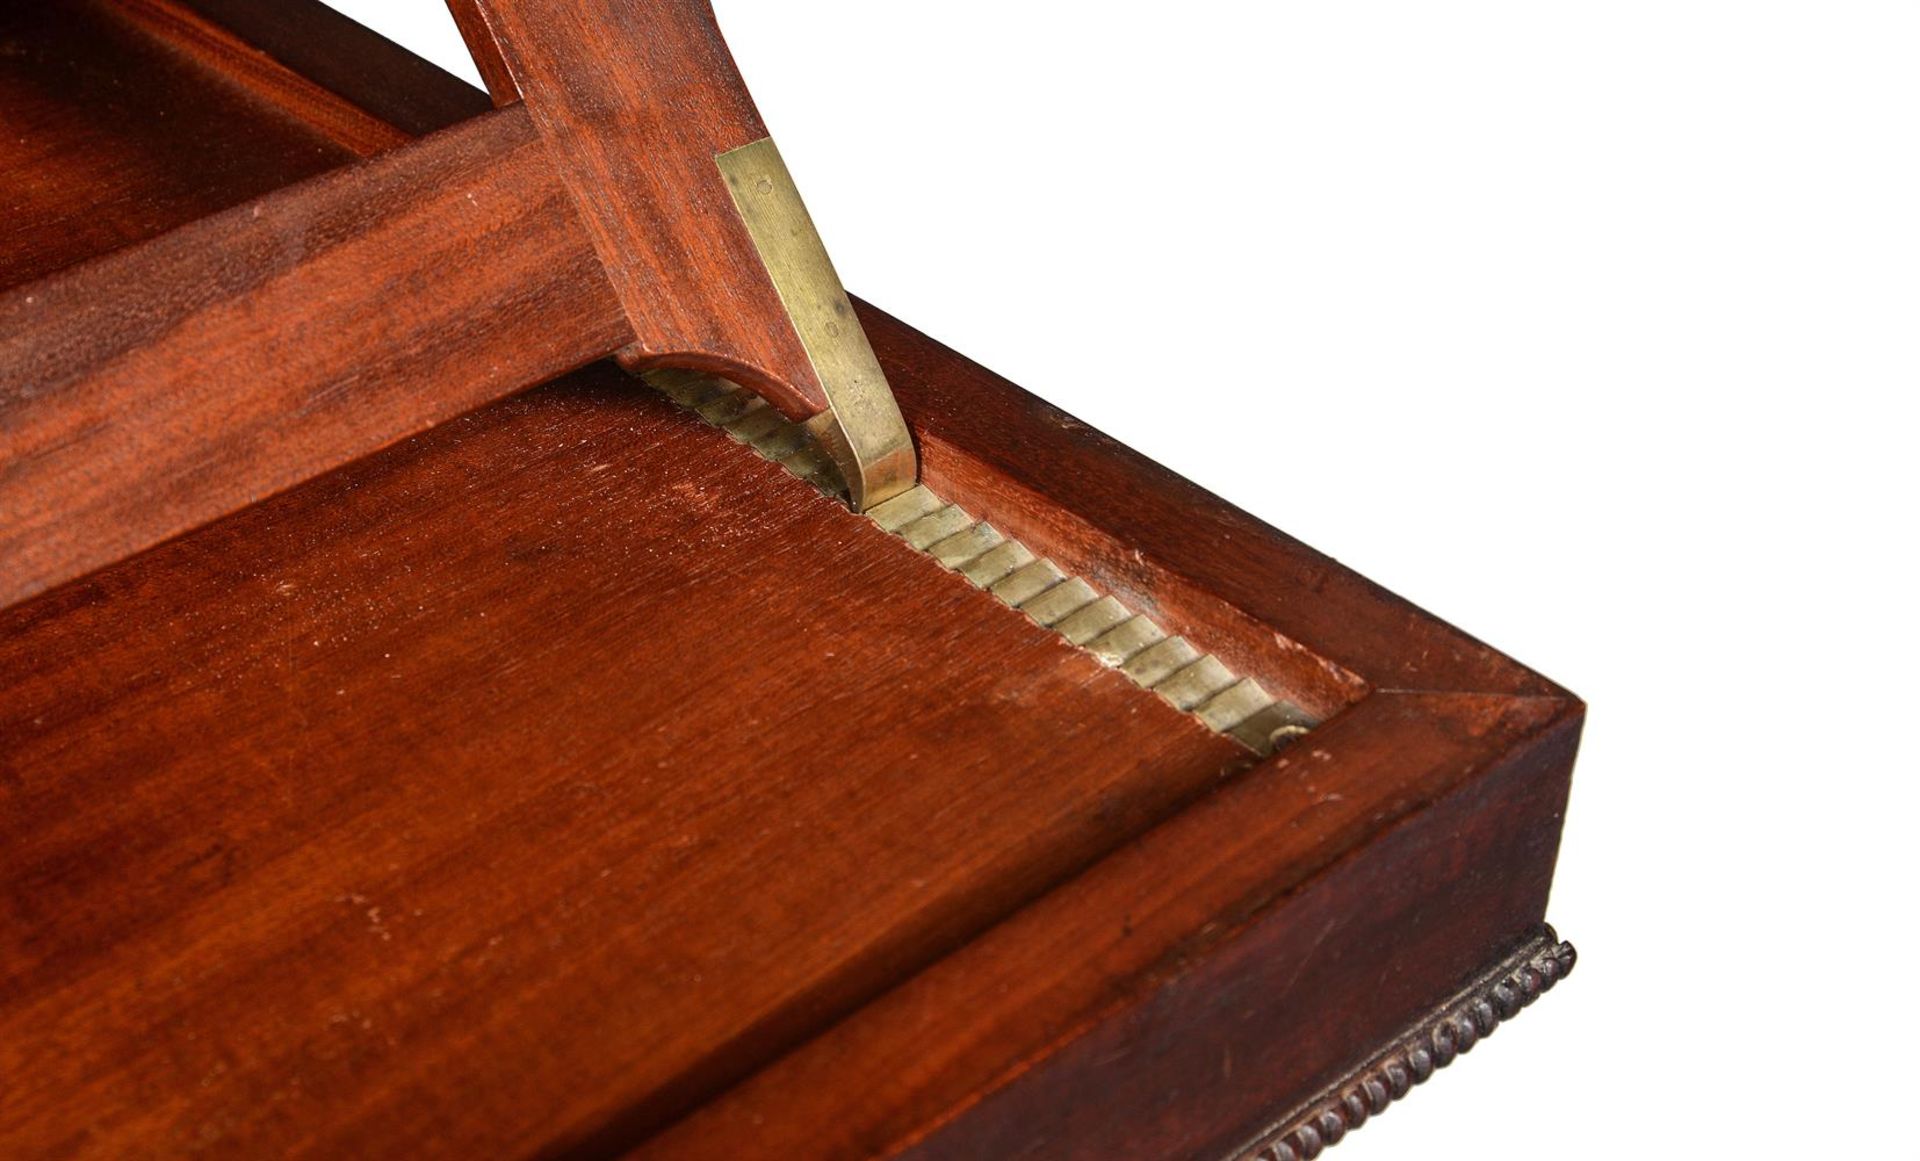 A REGENCY MAHOGANY LIBRARY READING TABLE, ATTRIBUTED TO GILLOWS, CIRCA 1815 - Image 4 of 5